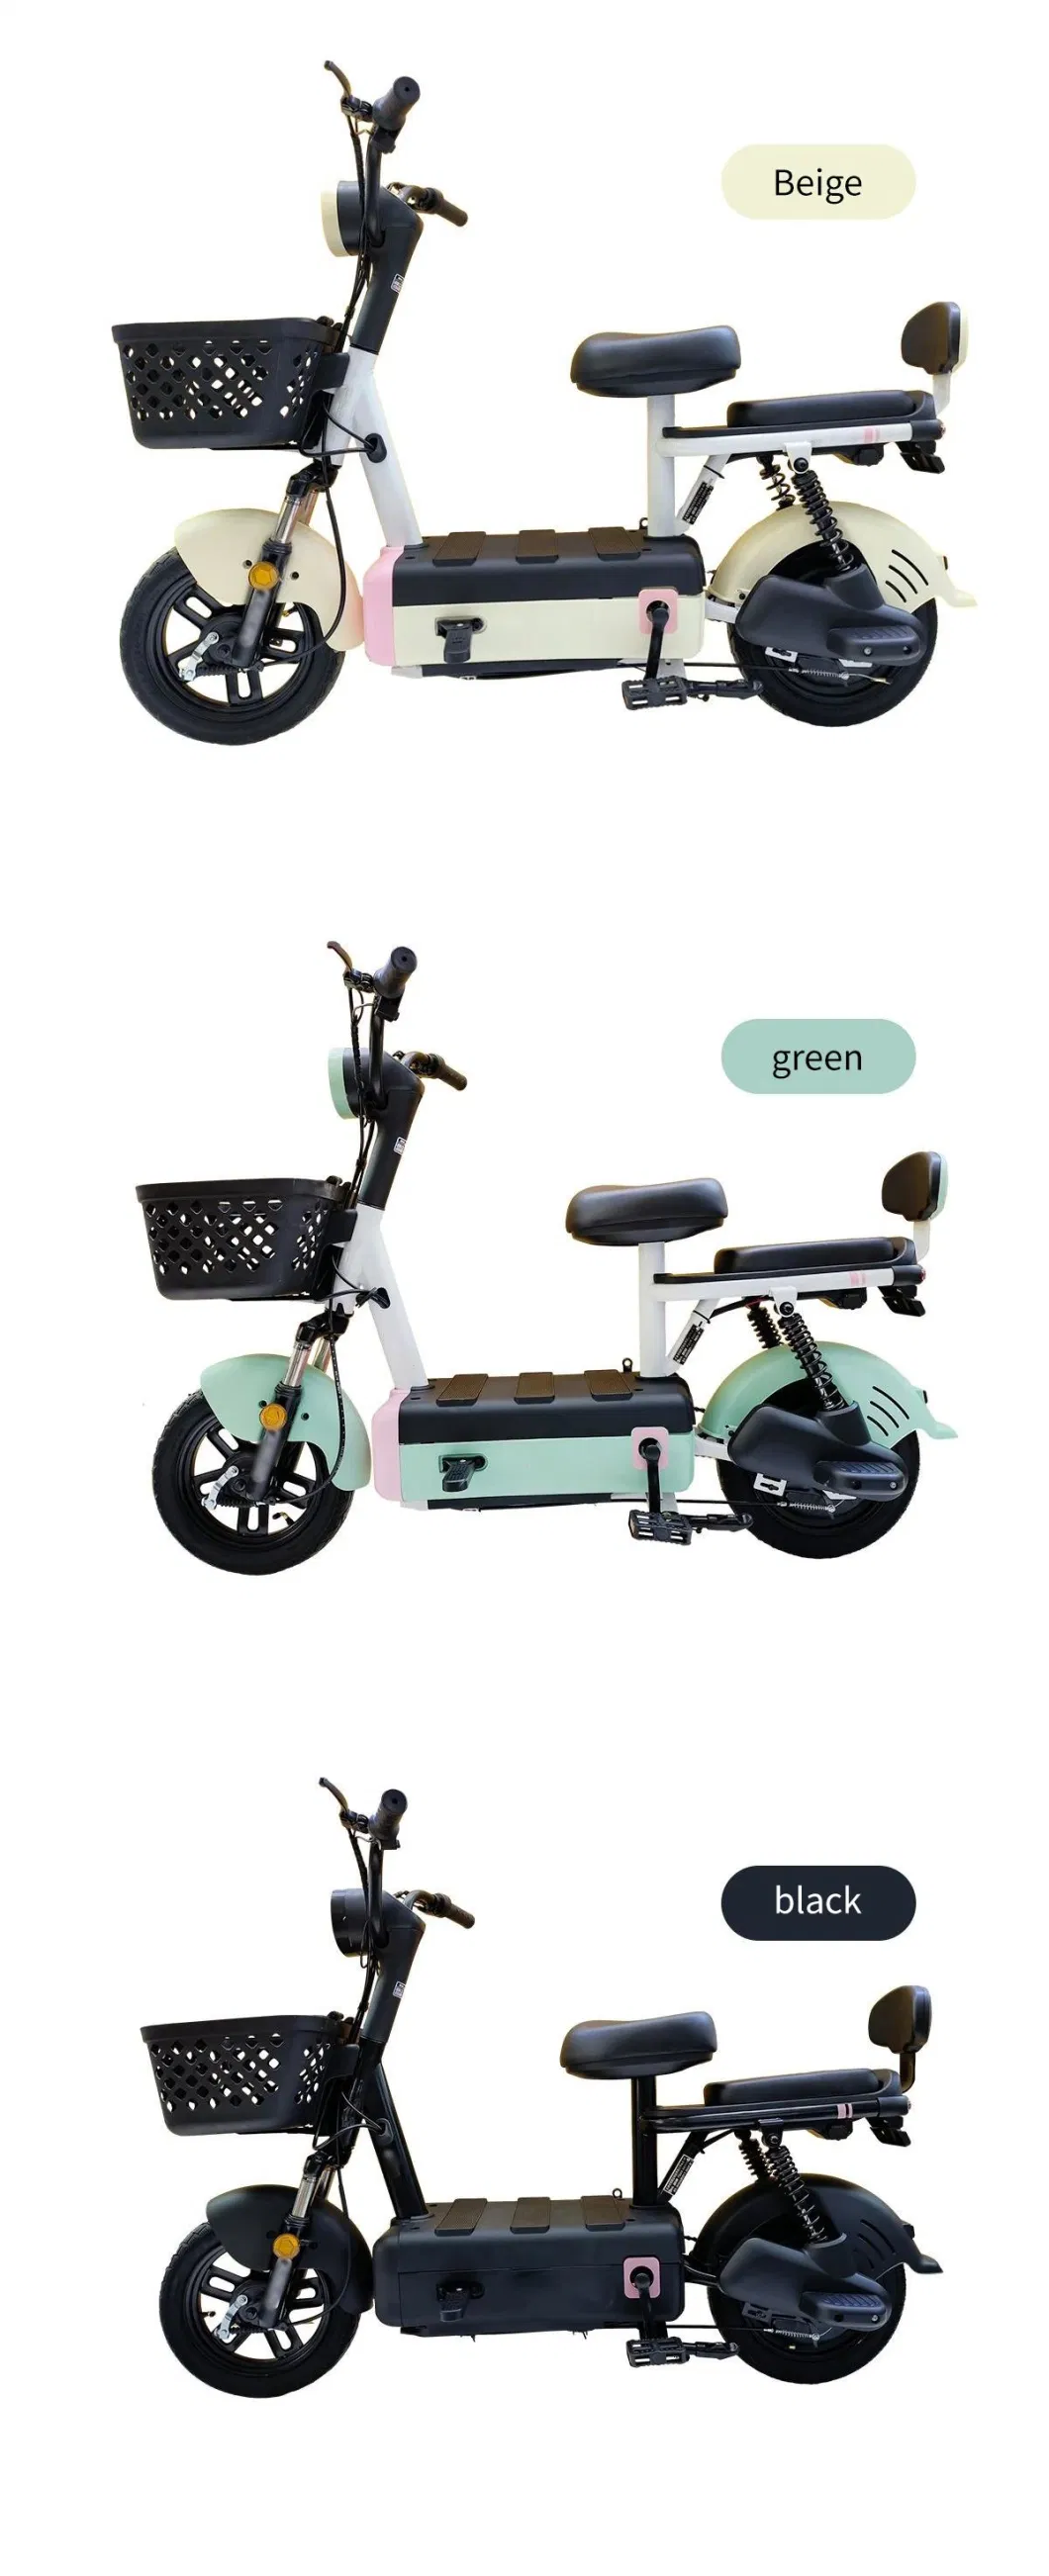 Cheap, High-Quality, and Most Popular Two Wheeled Electric Bicycles Equipped with High-Quality Motors